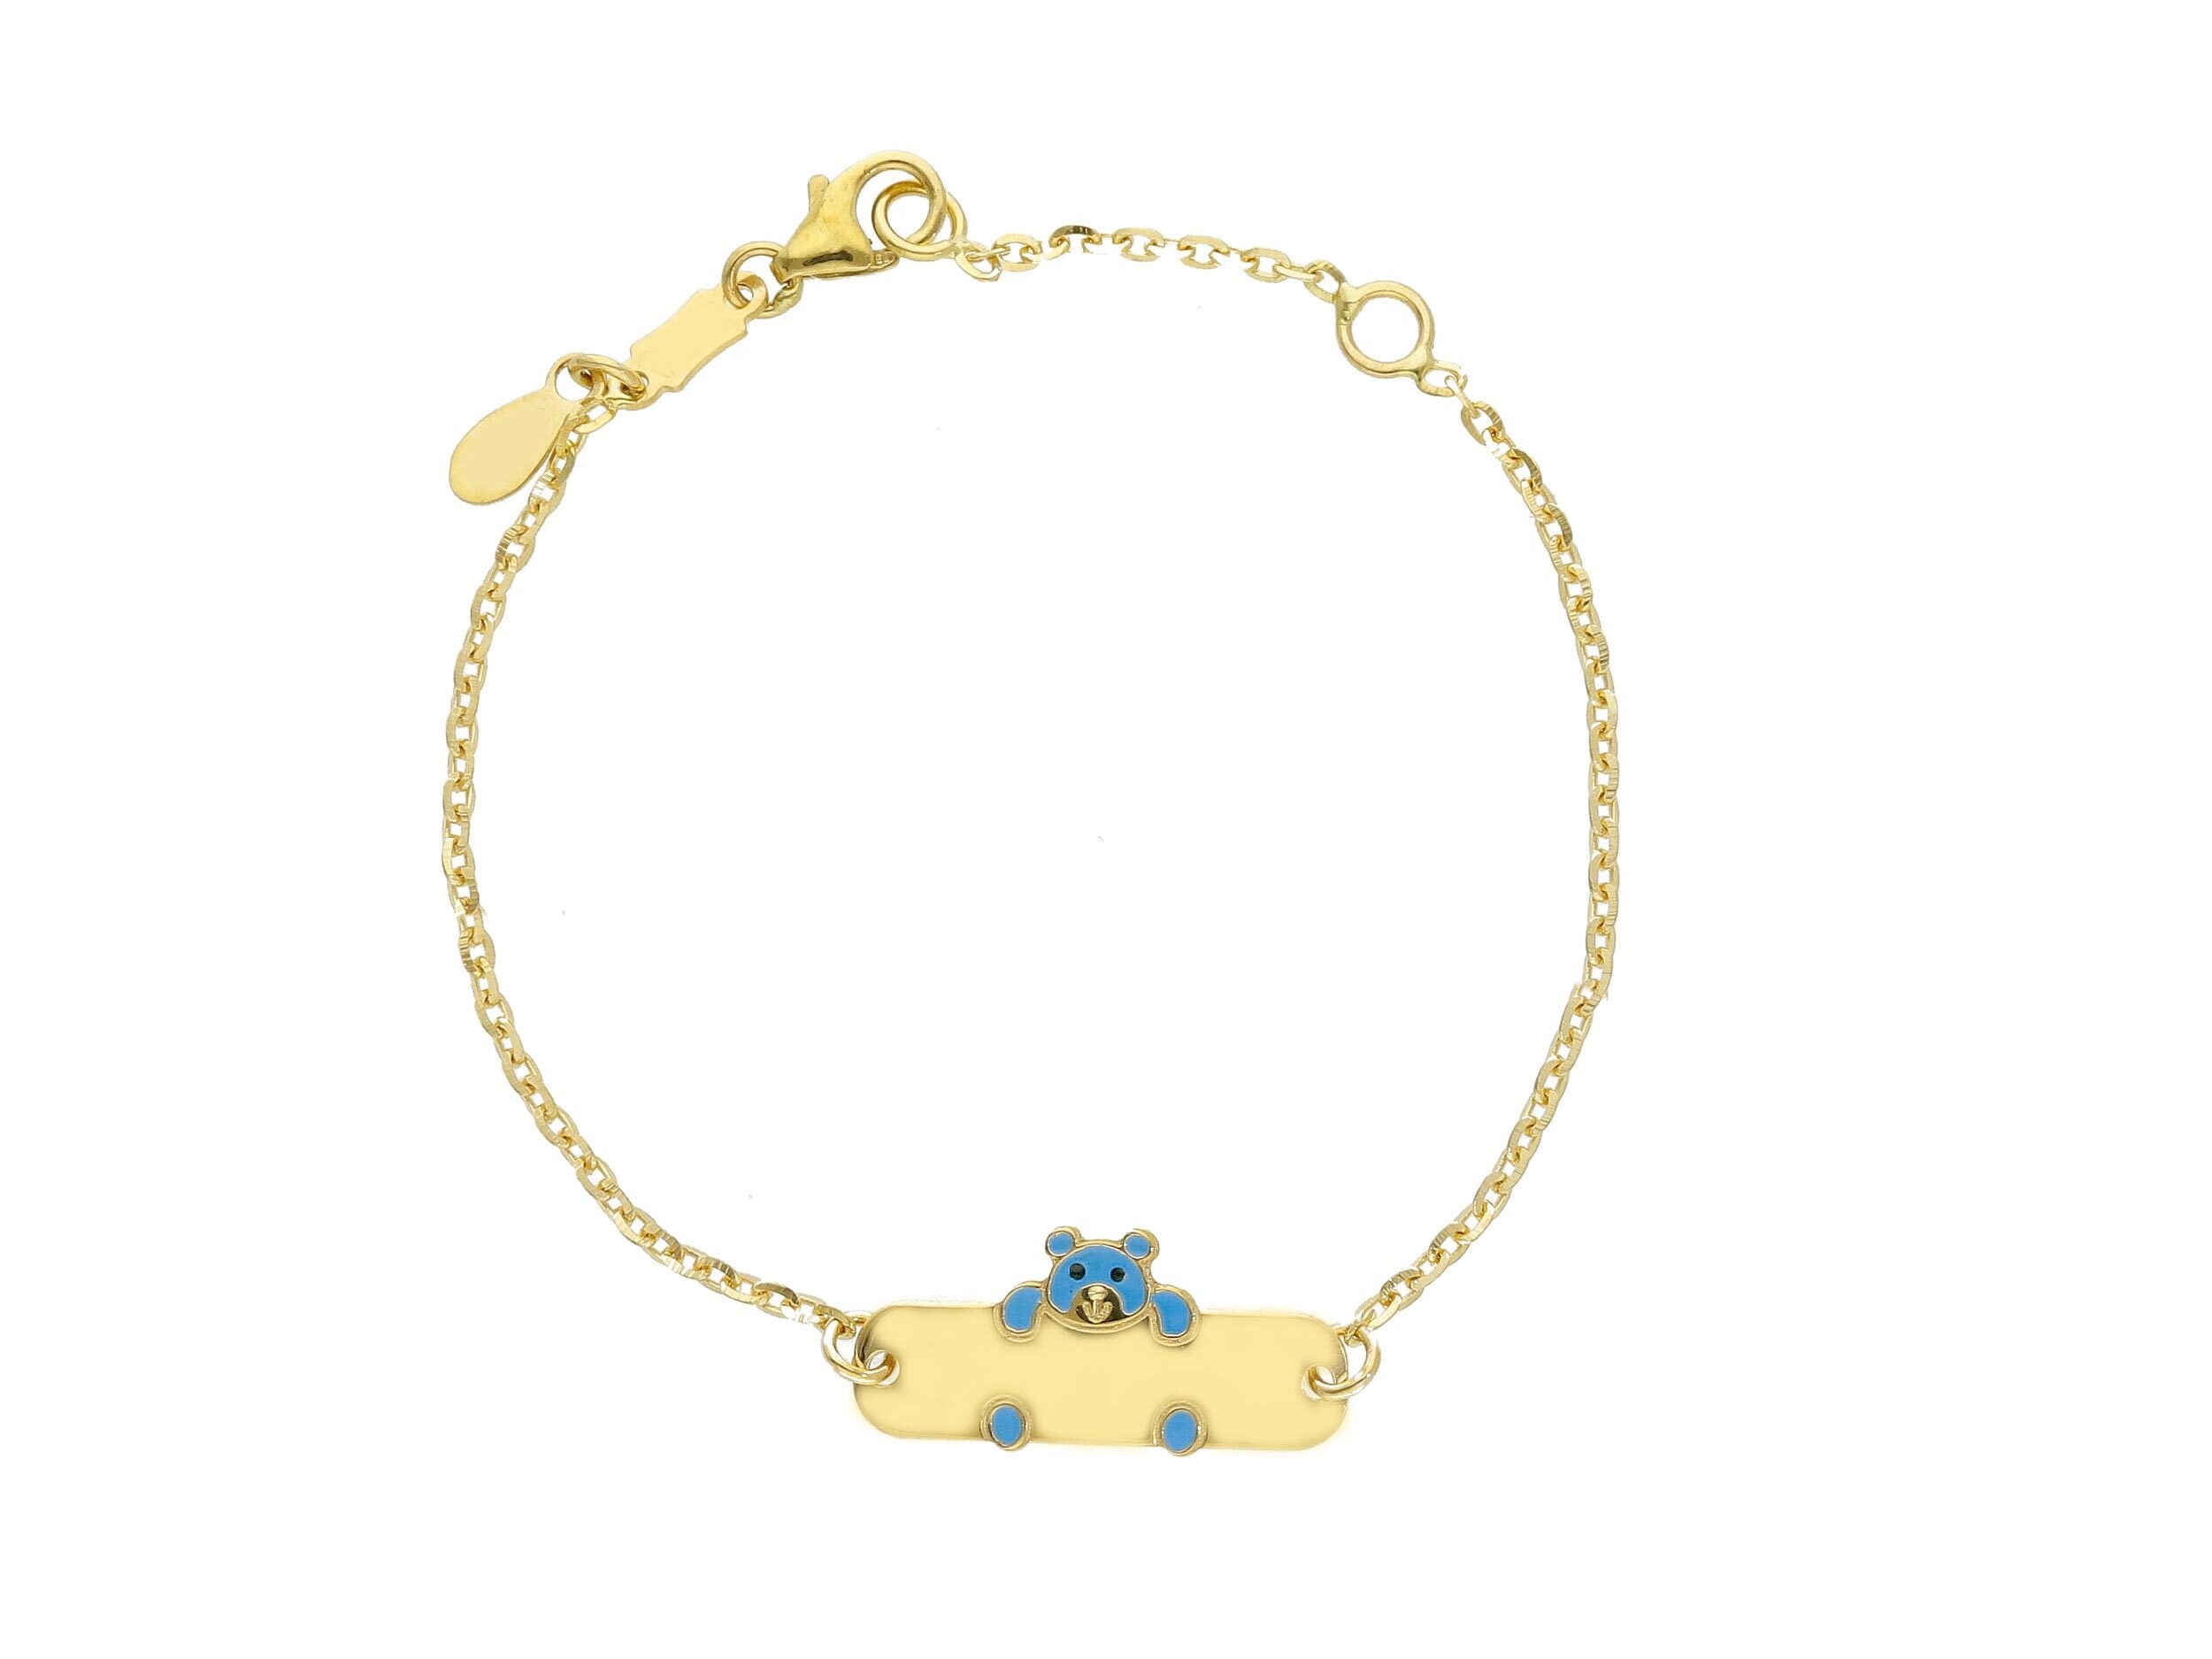 Get these Classic 22ct gold bracelets at PureJewels UK